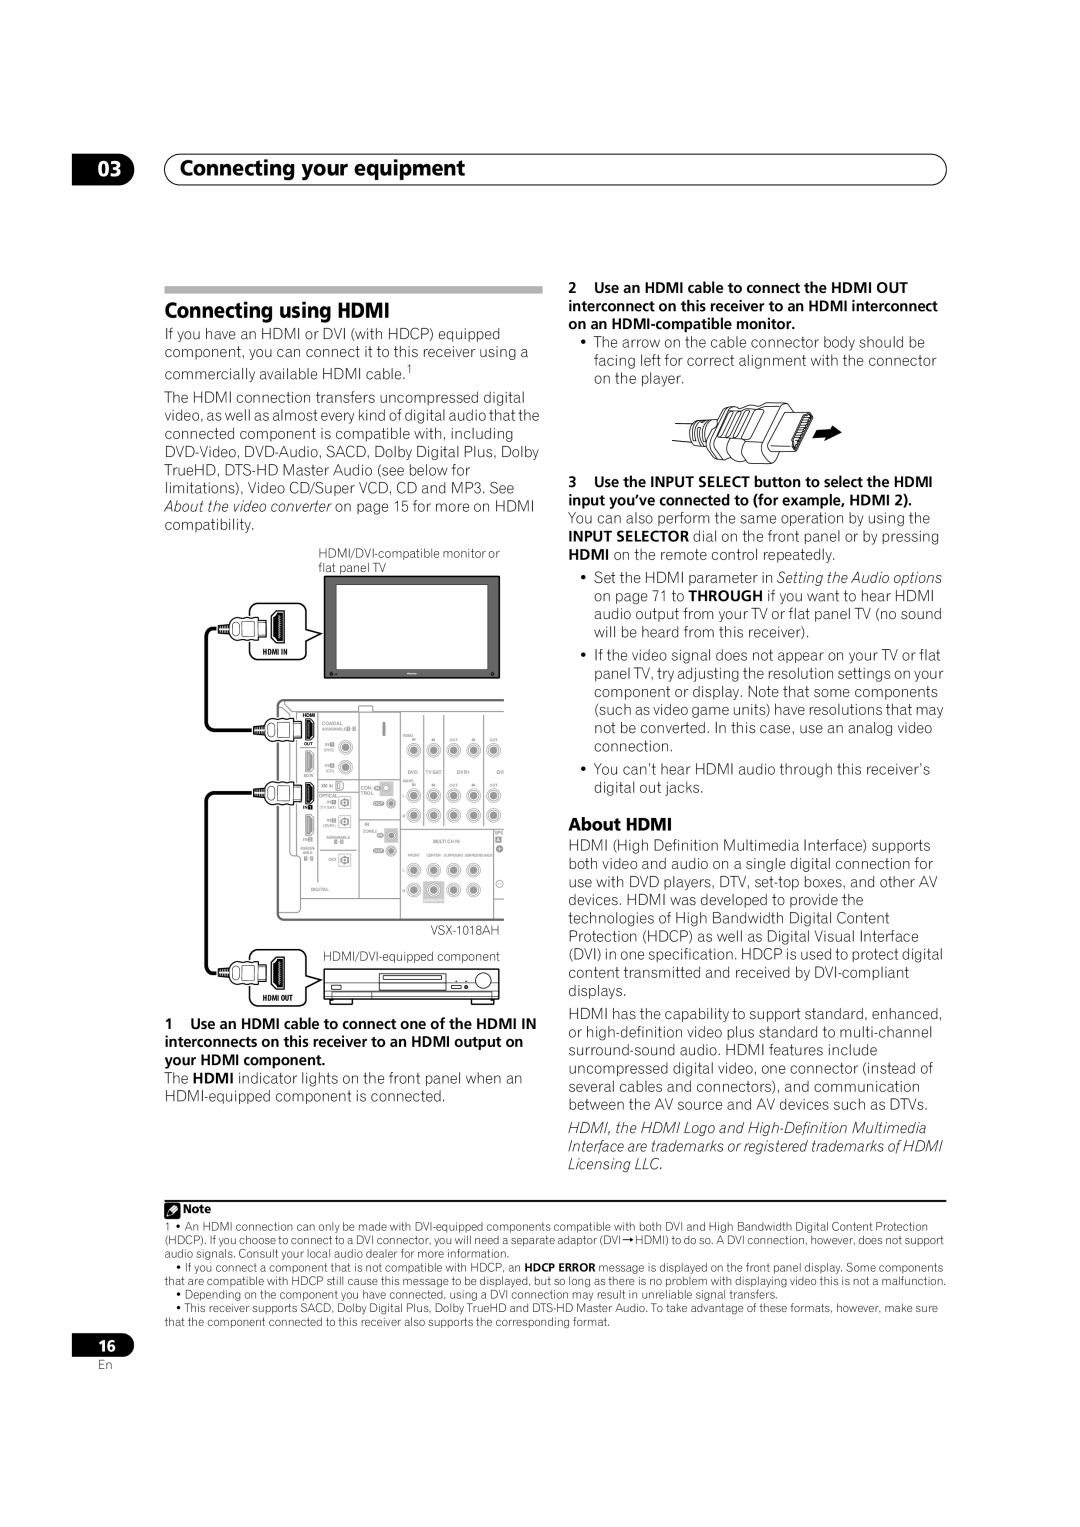 Pioneer VSX-1018AH-K 7 operating instructions 03Connecting your equipment Connecting using HDMI, About HDMI 